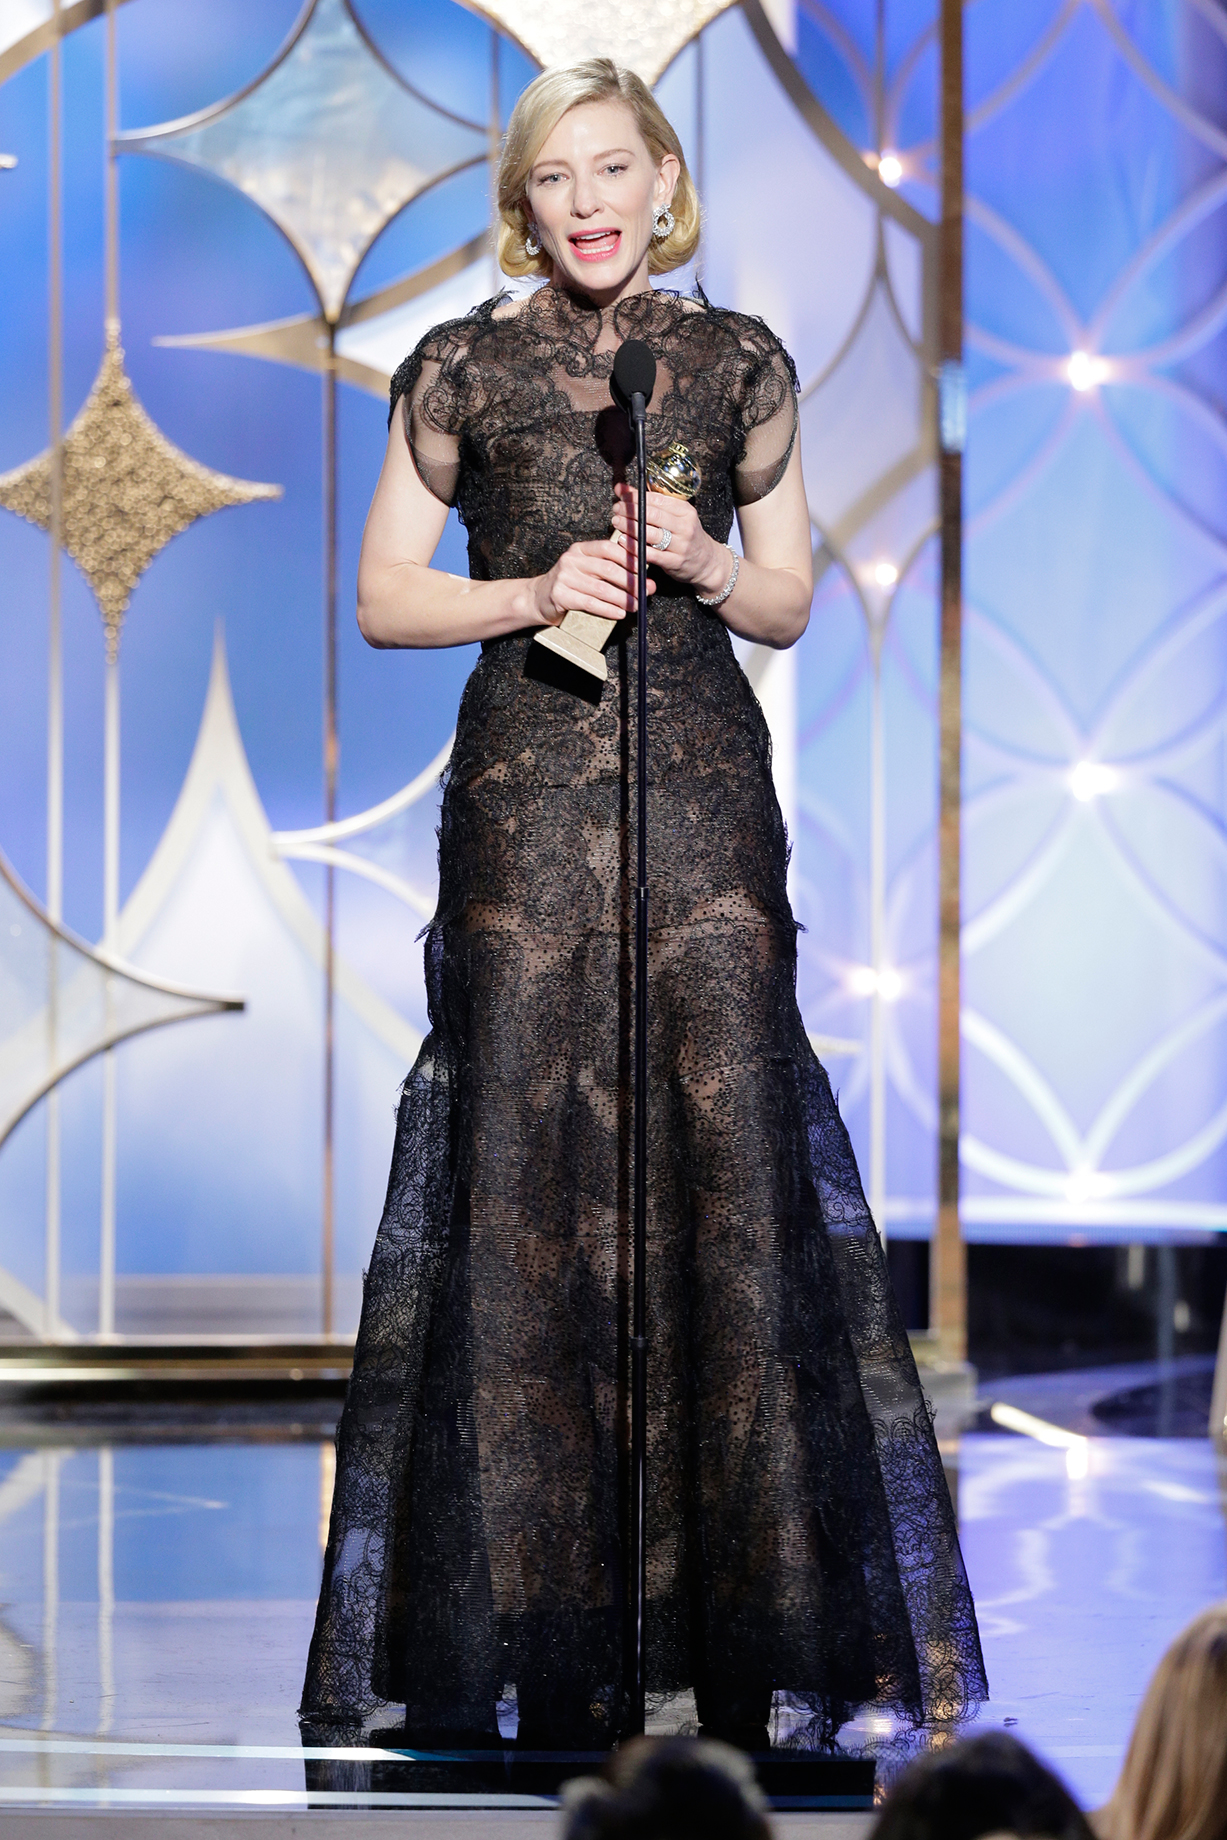 Celebs Who Have Been Over-Served at the Golden Globes: Cate Blanchett, Emma Thompson and More